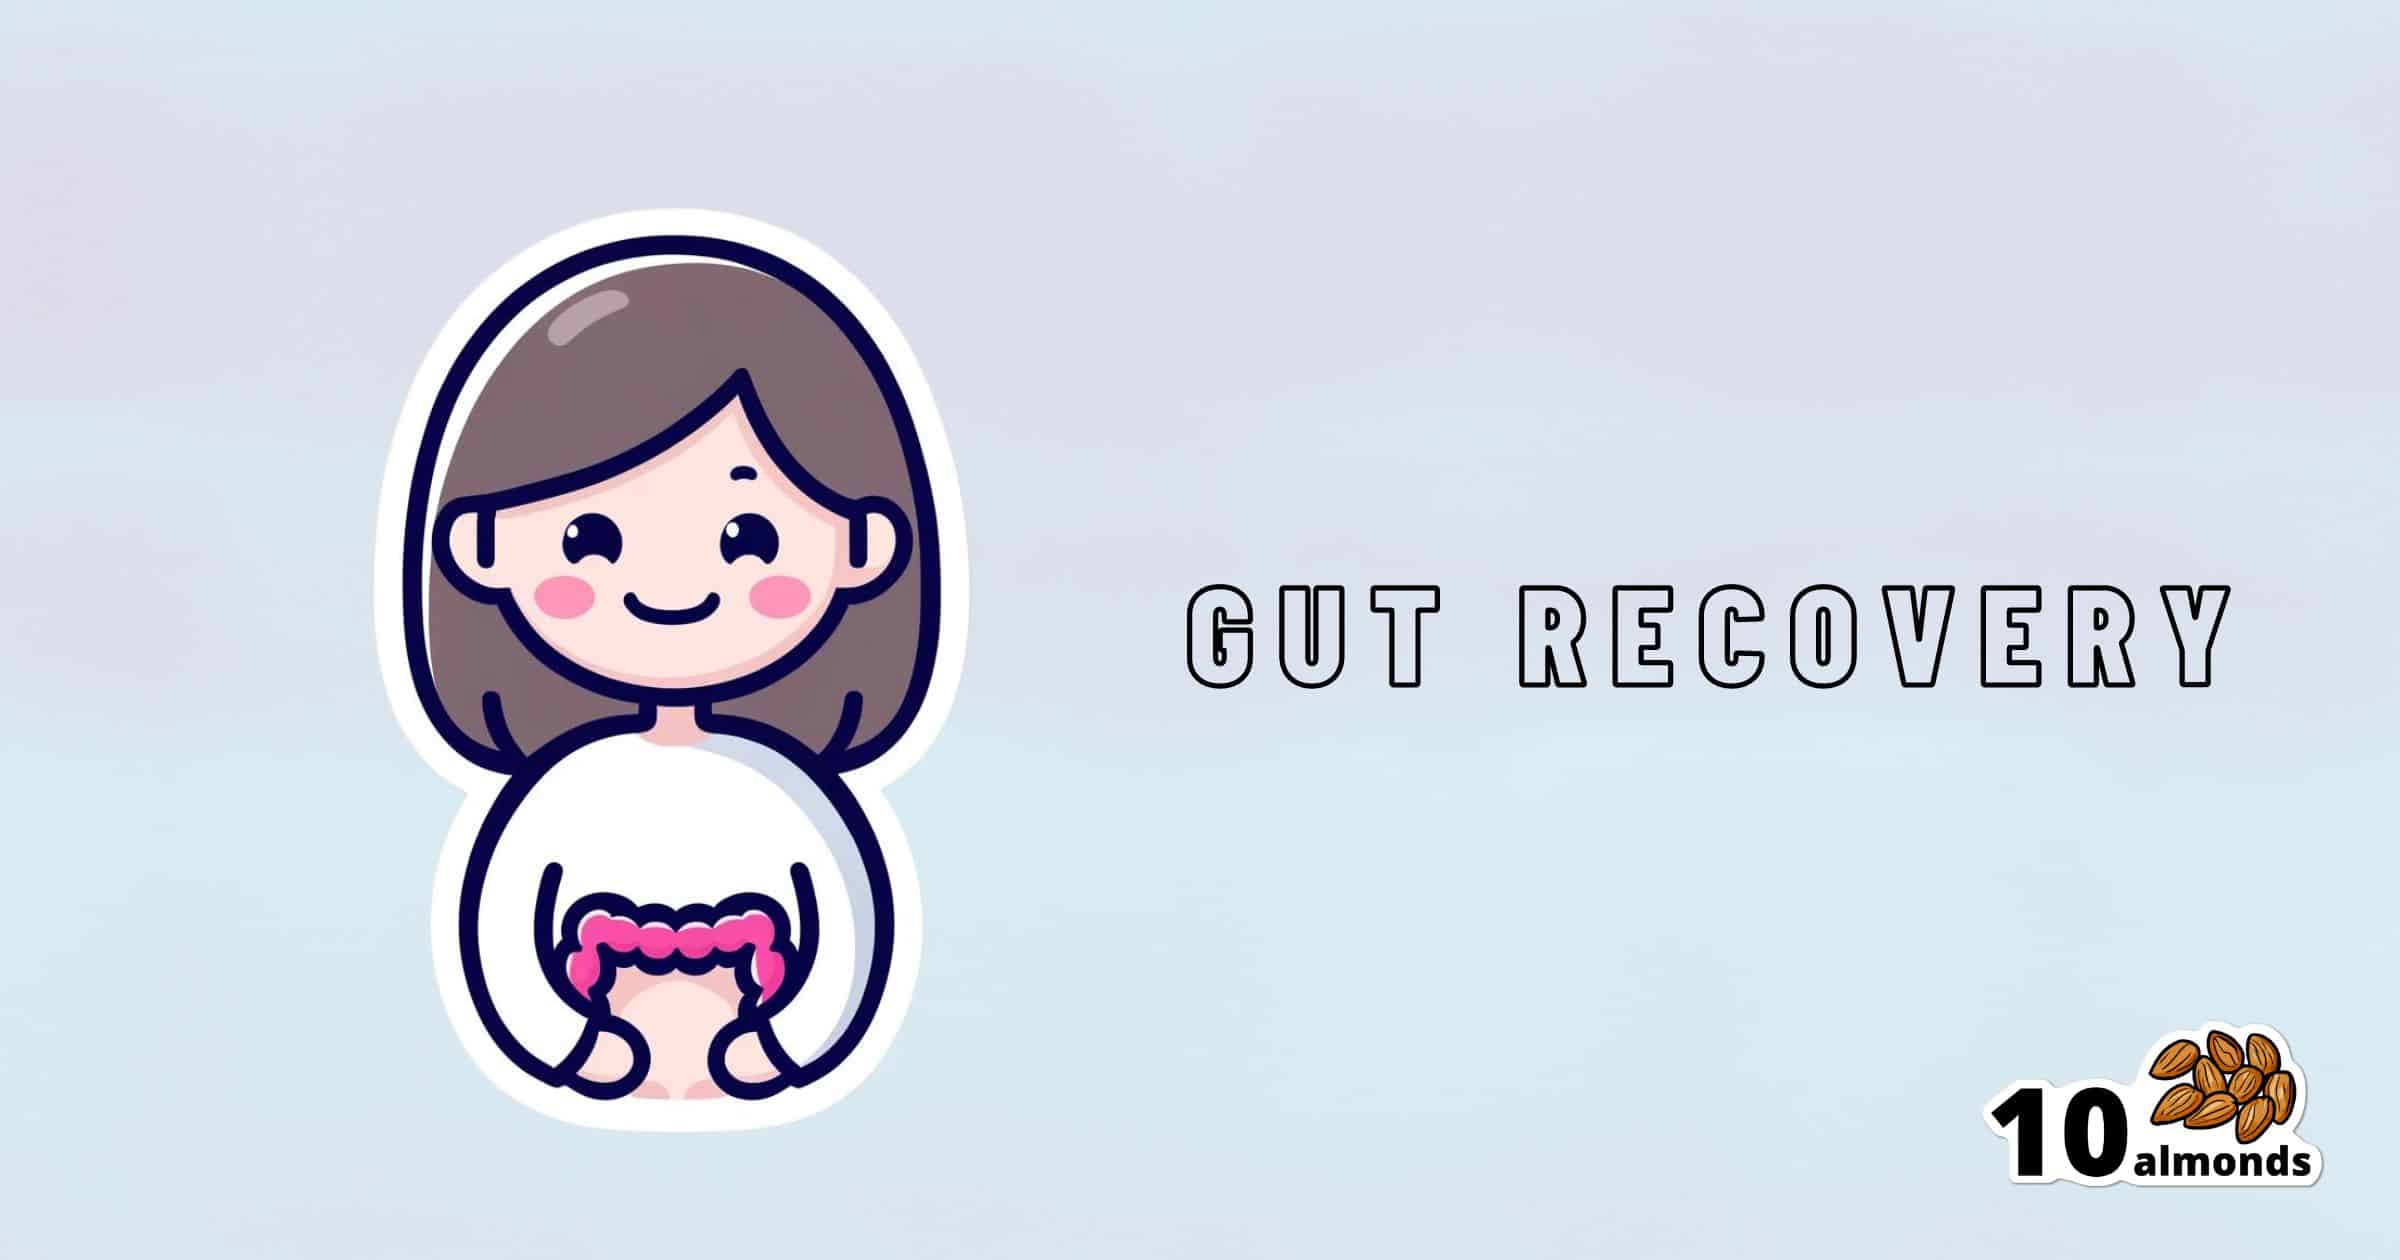 Illustration of a person holding a gut symbol with the text "Gut Recovery" beside them. In the bottom right corner, there are ten almonds with the text "10 almonds" next to them. The image appears on a light, gradient background, reflecting the theme of Healing Your Gut.